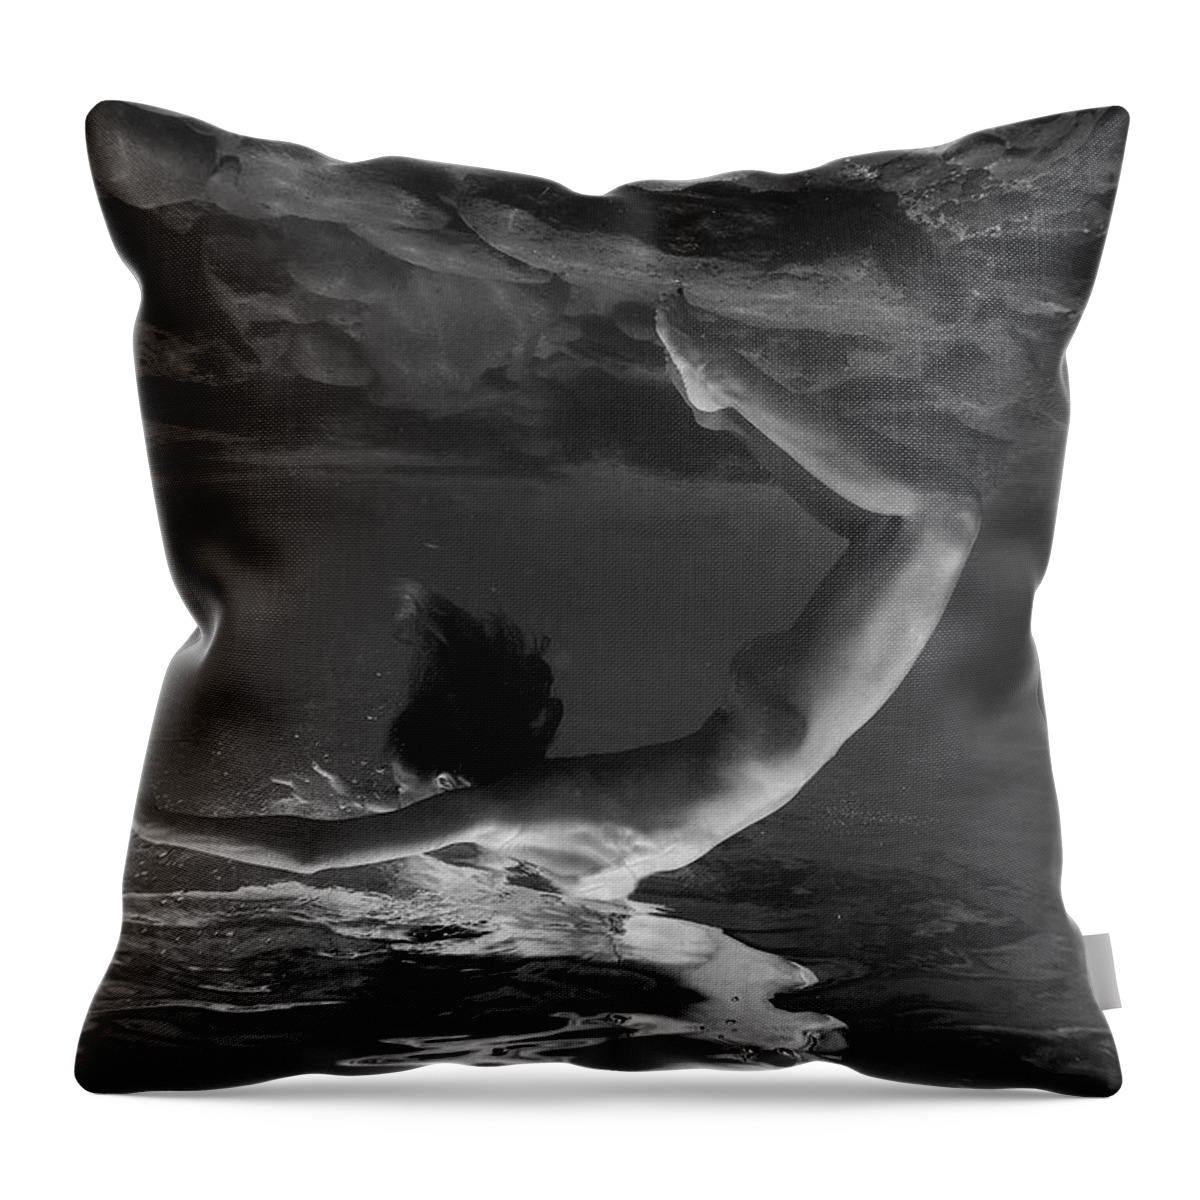 Naked Throw Pillow featuring the photograph Goddesses 4 by Mache Del Campo